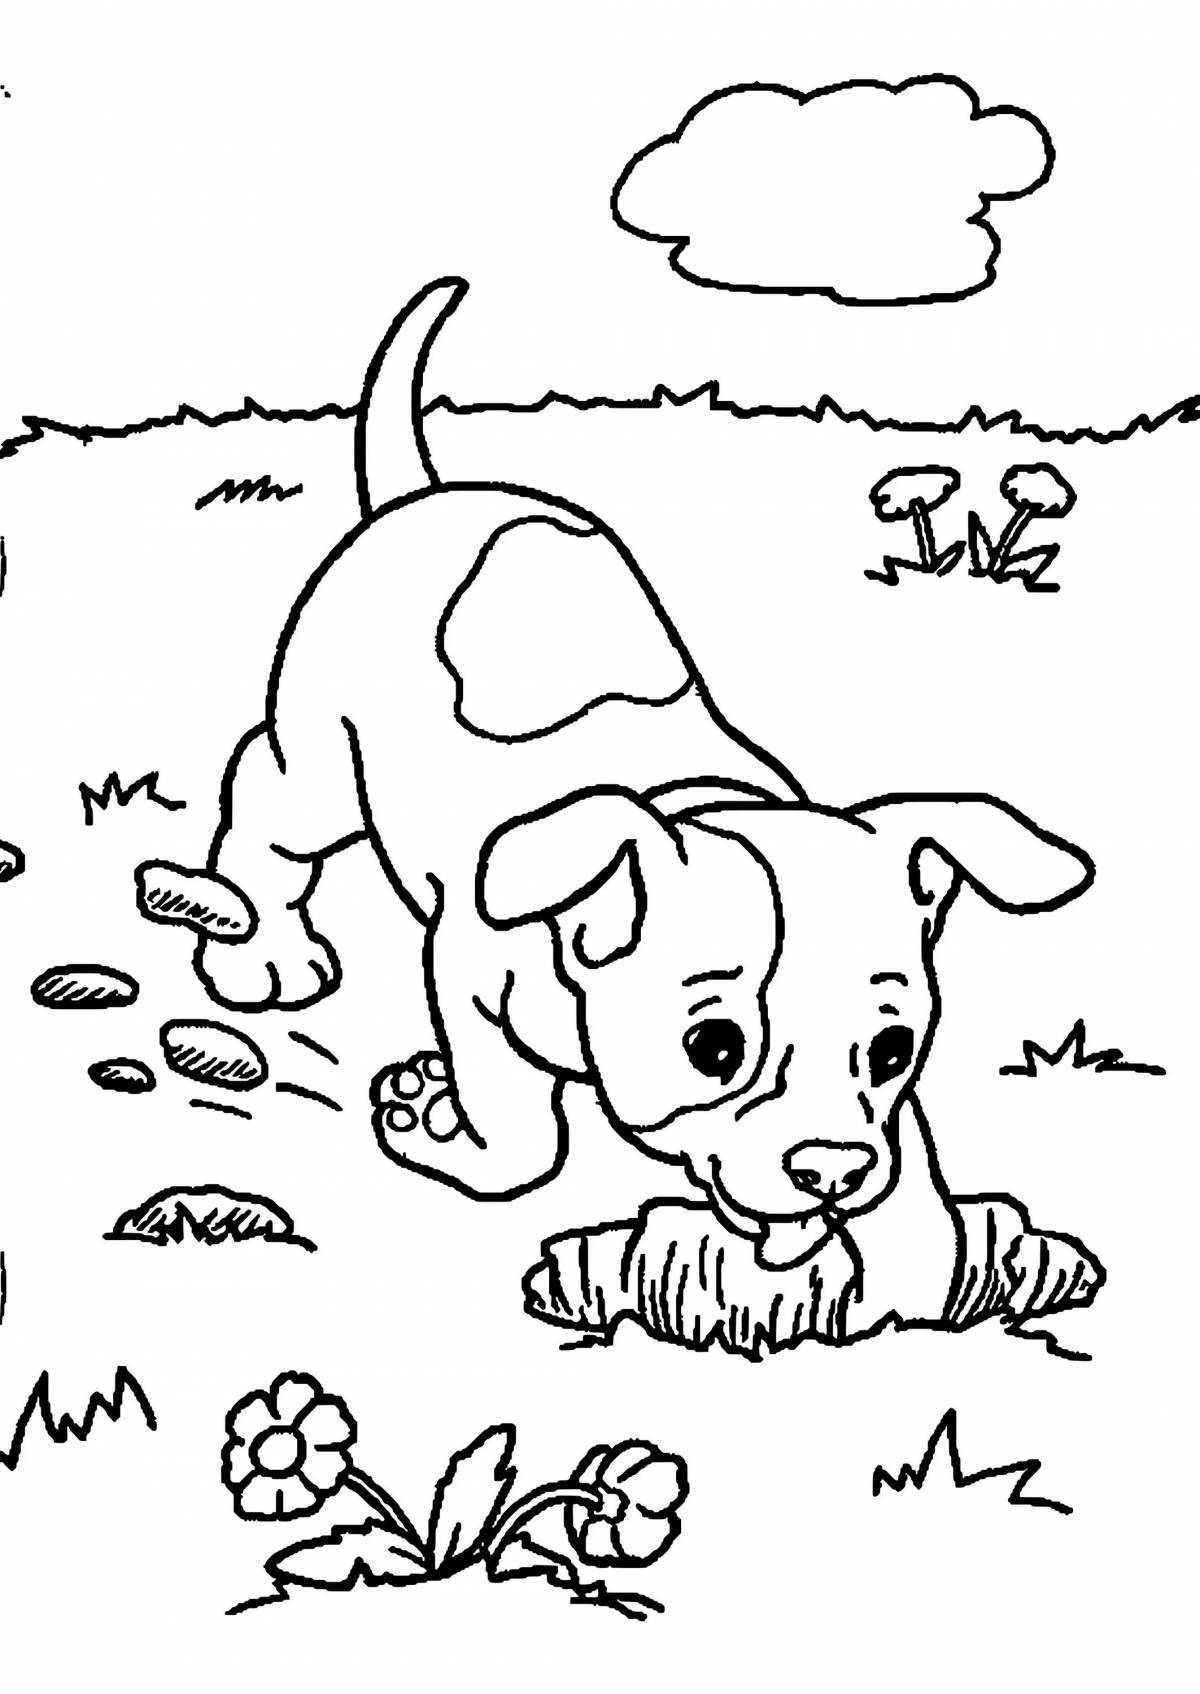 Coloring page excited blue puppy